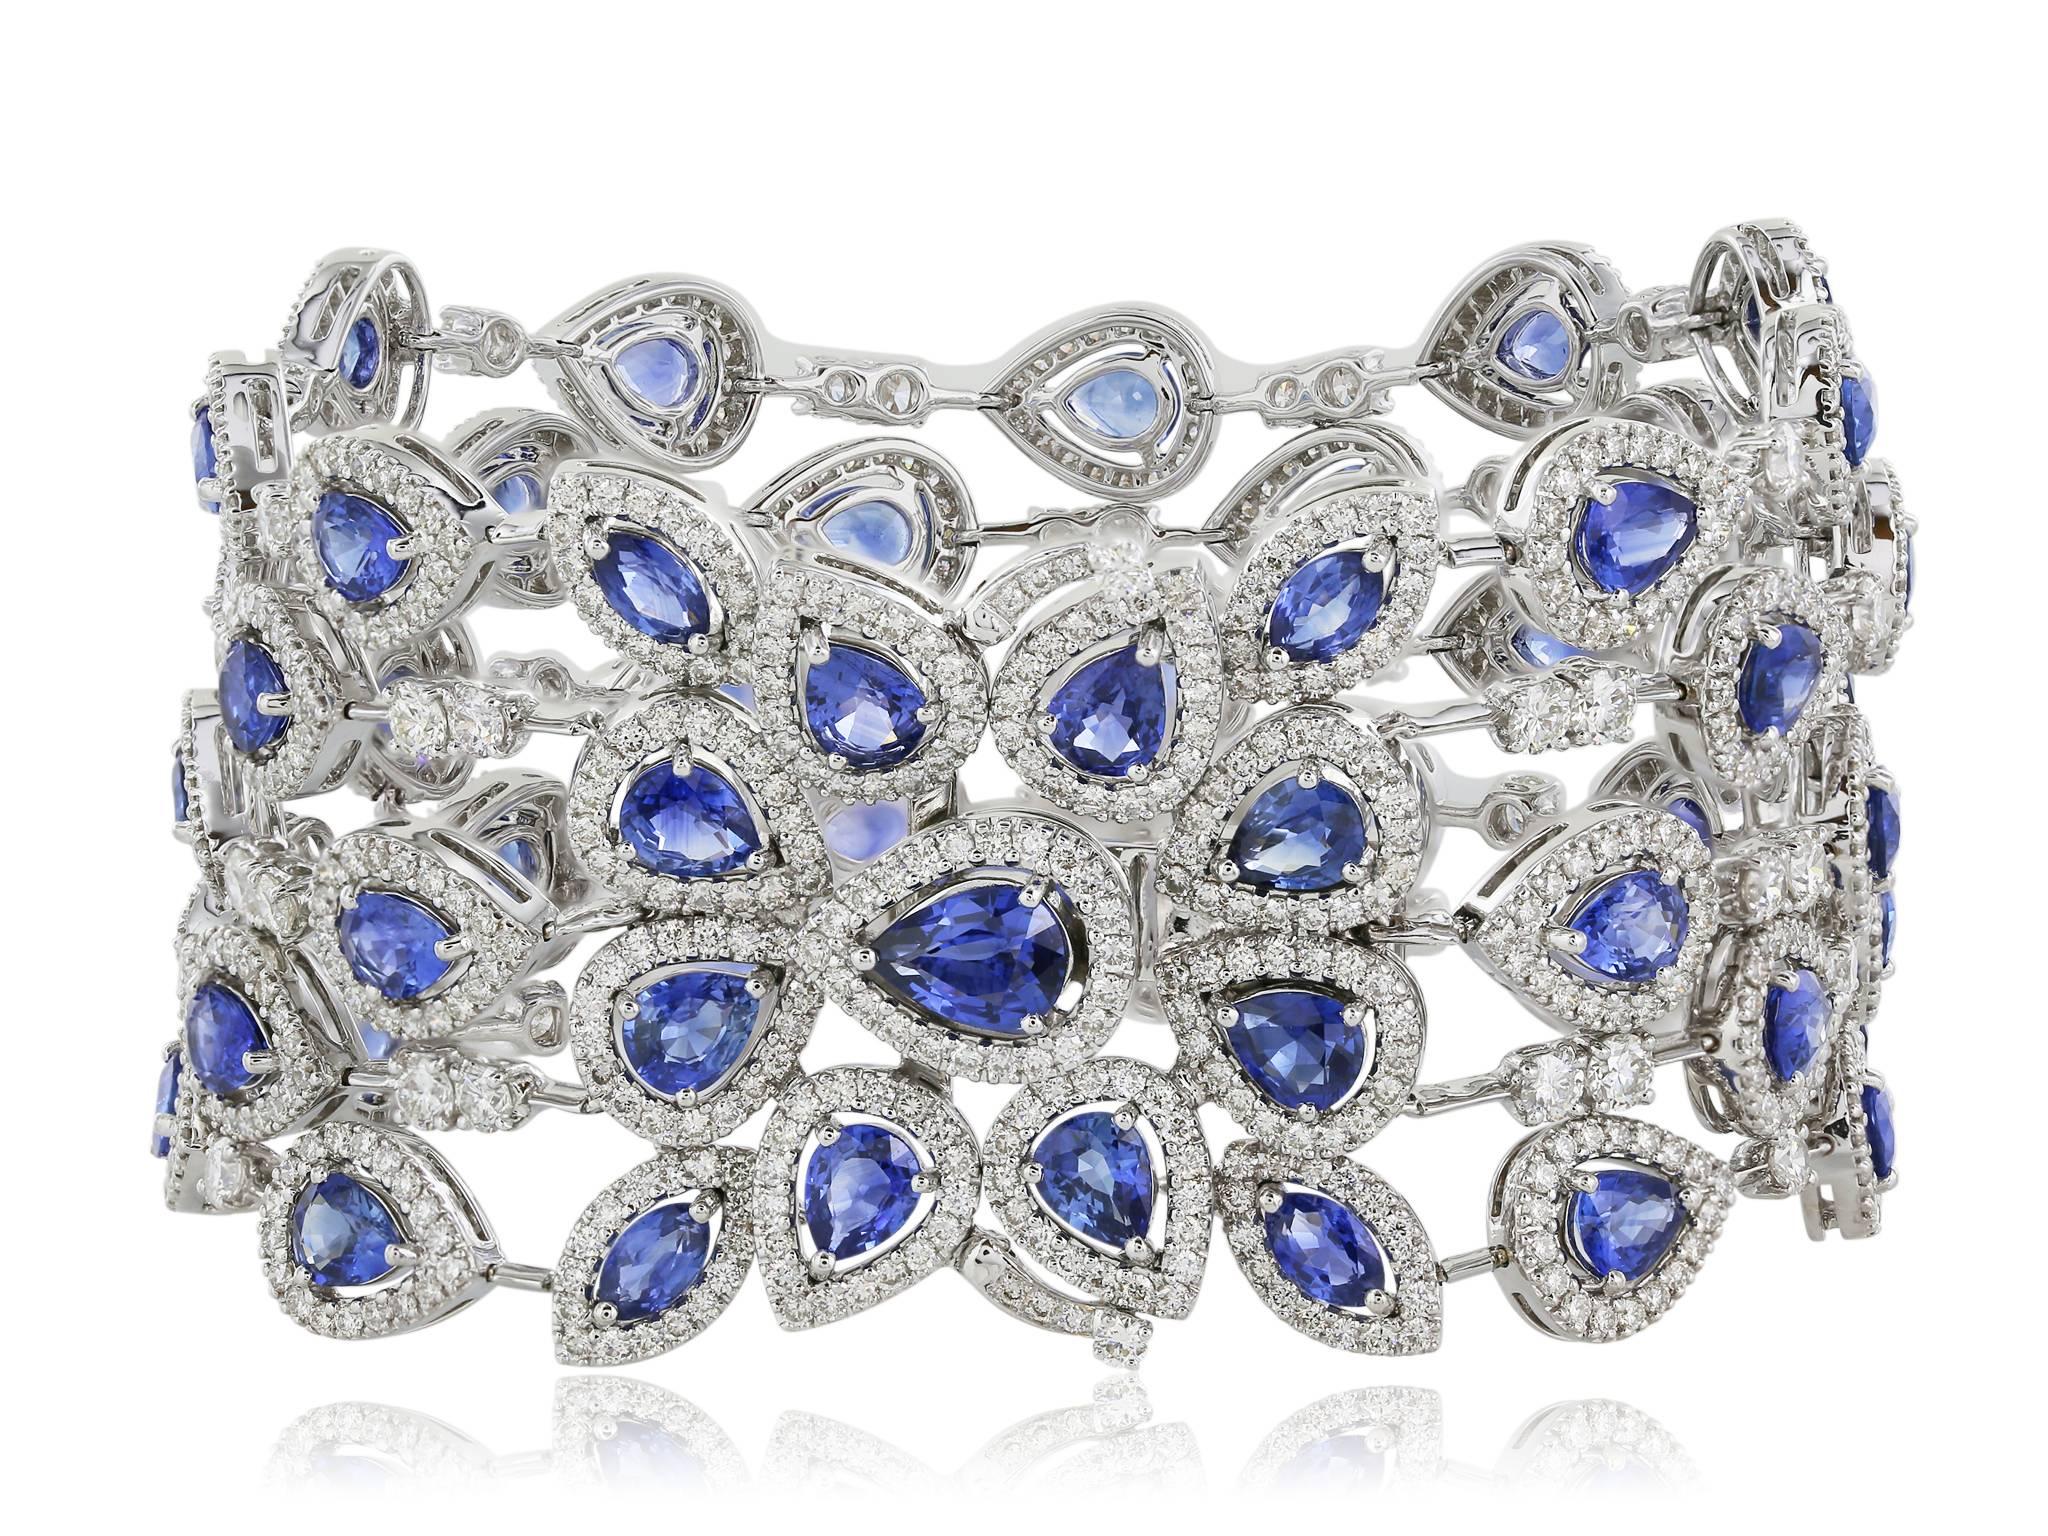 Flexible 18 karat white gold five strand bracelet featuring 19.48 carats of pear shaped sapphires. Each sapphire is surrounded by a halo of round brilliant cut white diamonds.  Interspersed amongst the sapphires are .10 carat round brilliant cut